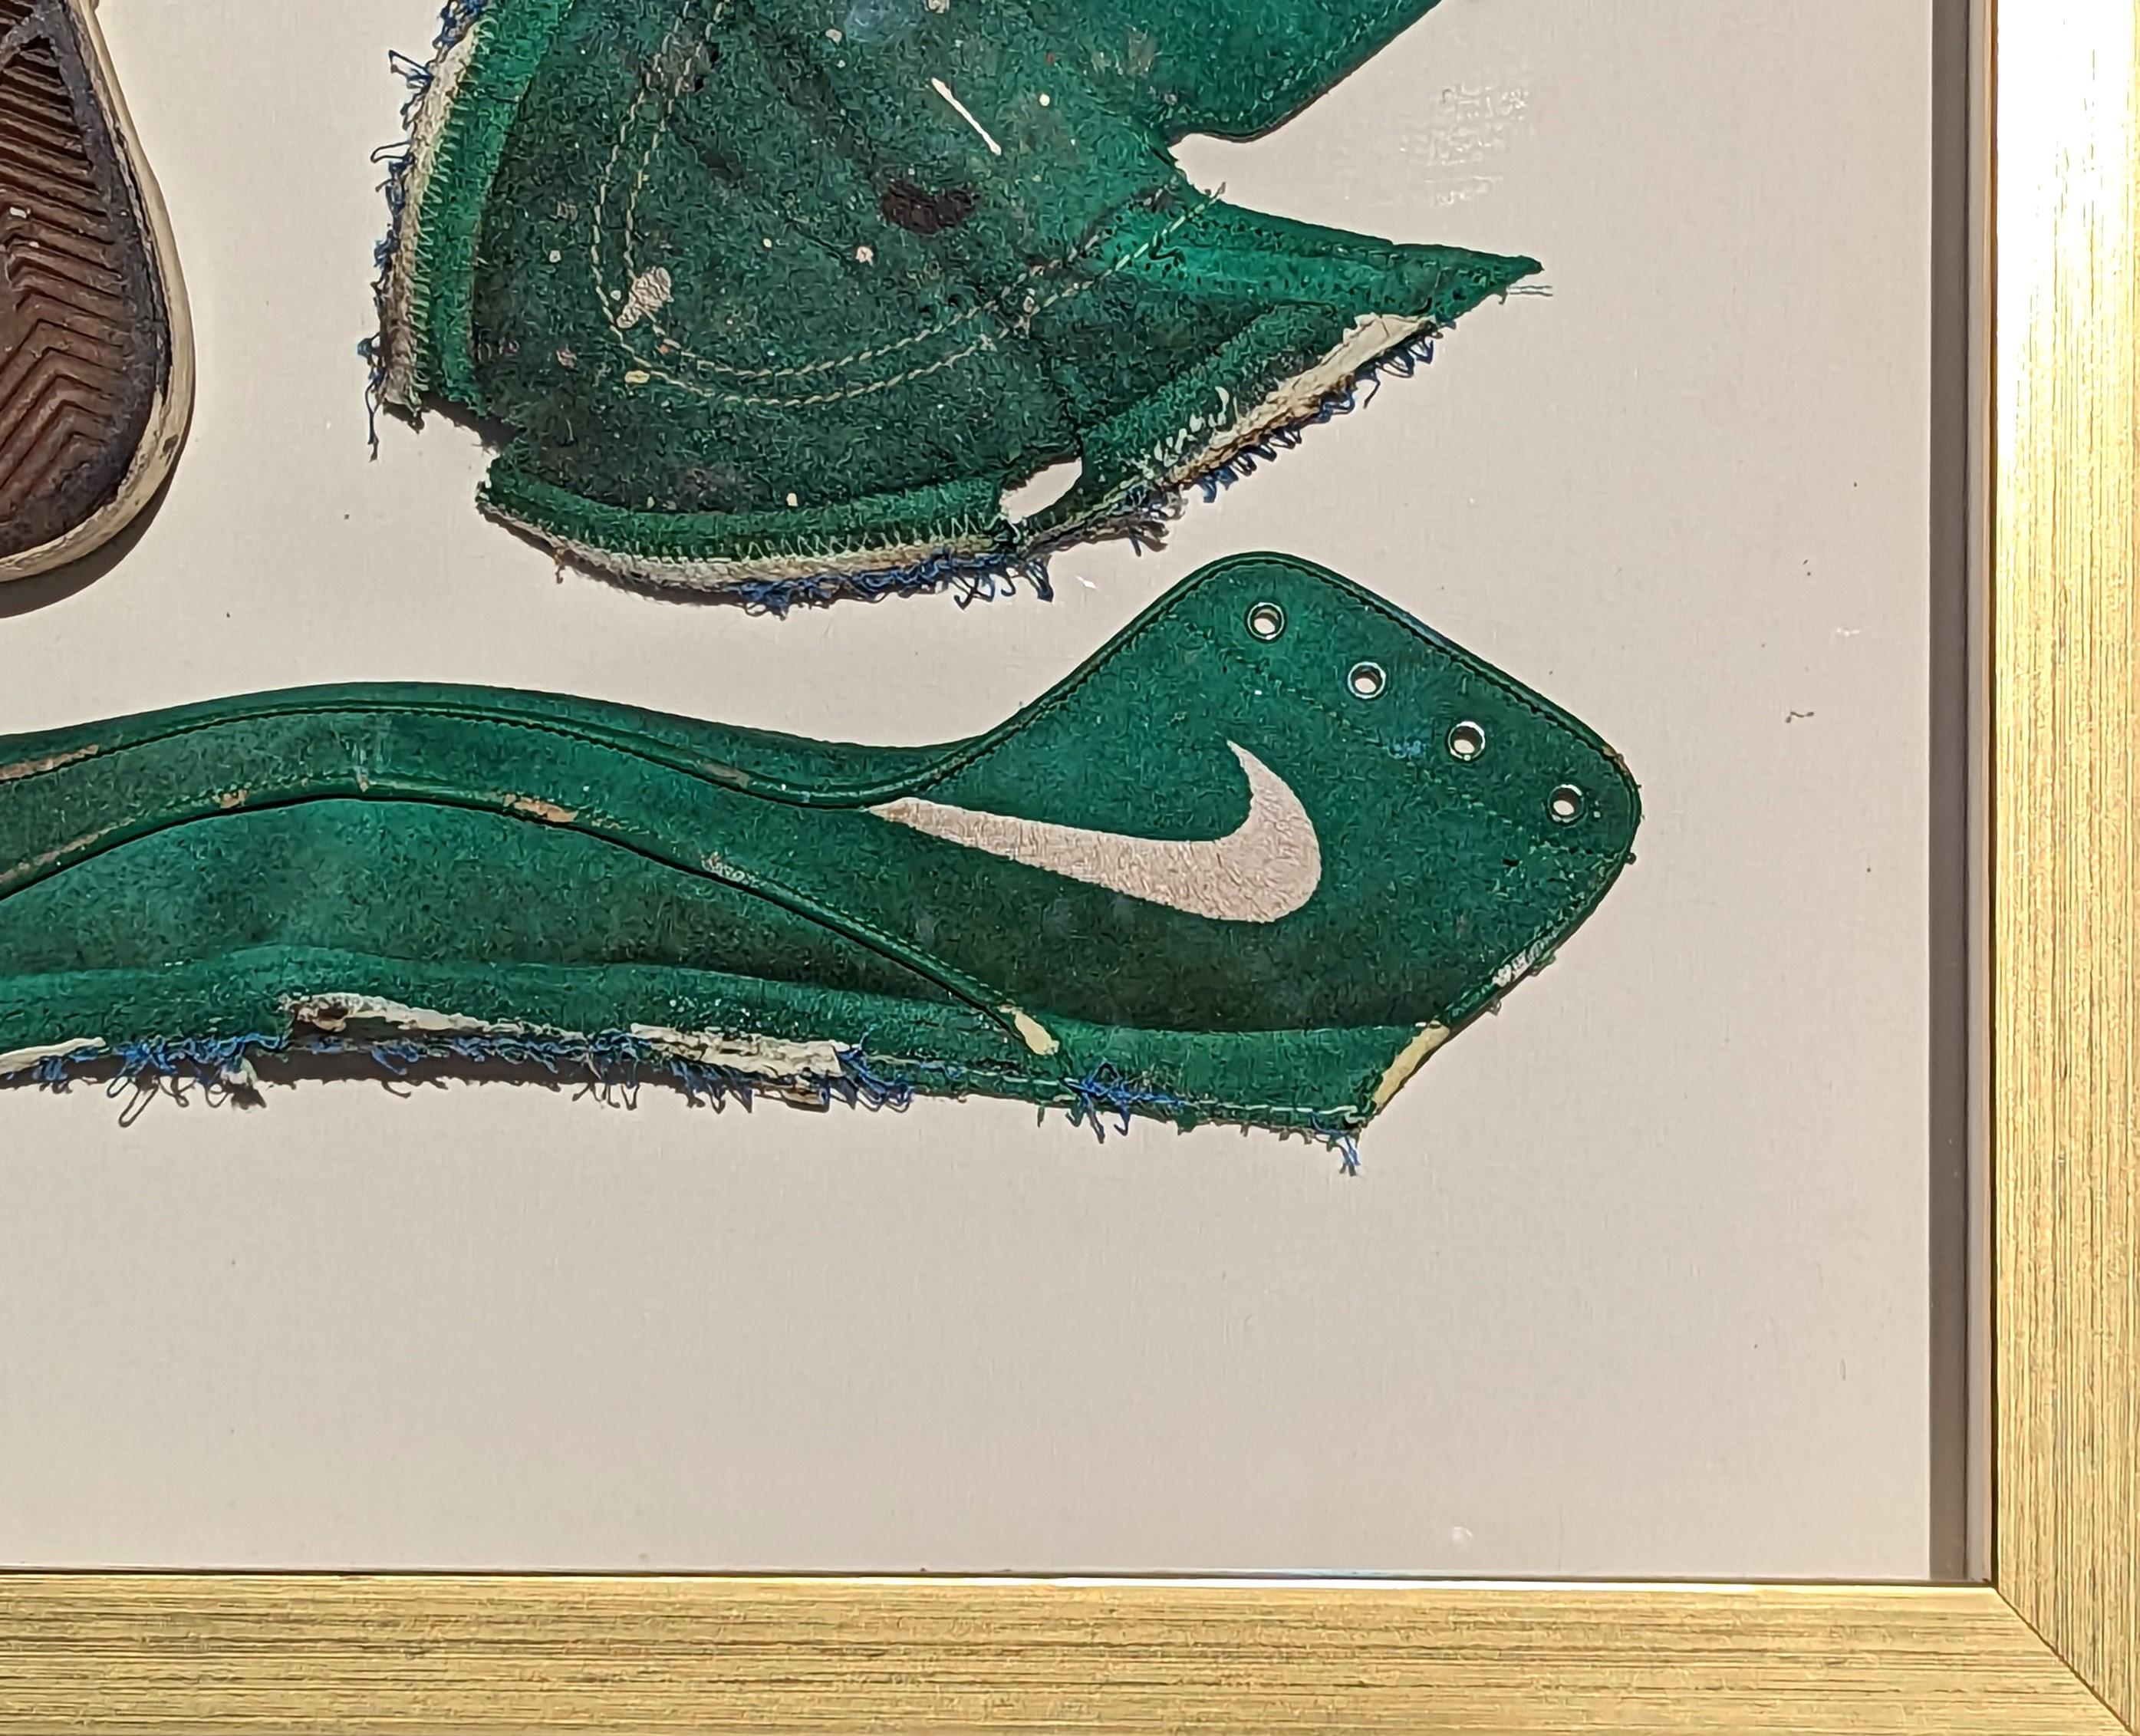 Contemporary found object painting by Houston, TX artist Tra' Slaughter. The work features a green deconstructed shoe floated in a gold frame. This piece was included in Tra's solo show 